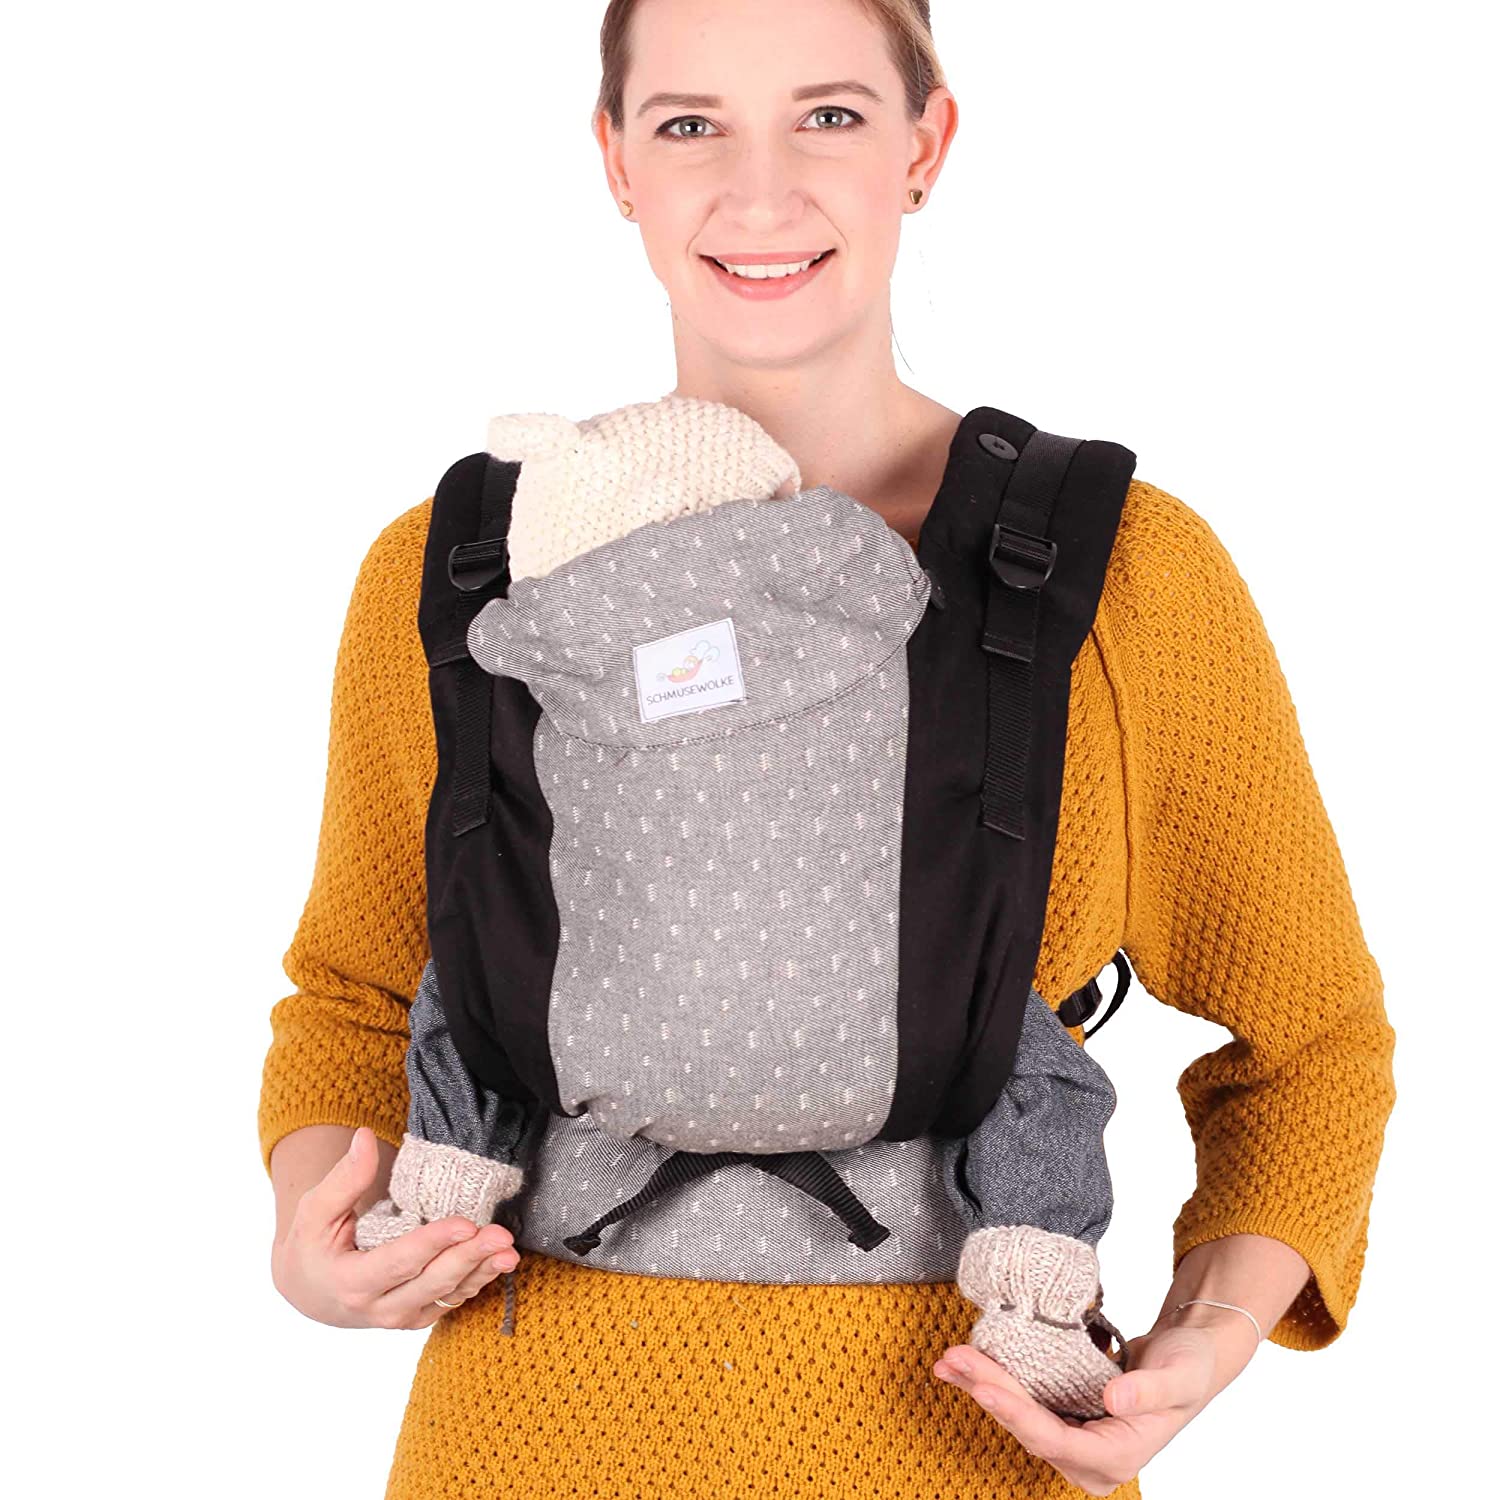 SCHMUSEWOLKE Family FullBuckle Baby Carrier Natural Newborn and Toddlers Cotton Baby Size 0-12 Months 3-12 kg Belly and Back Carrier